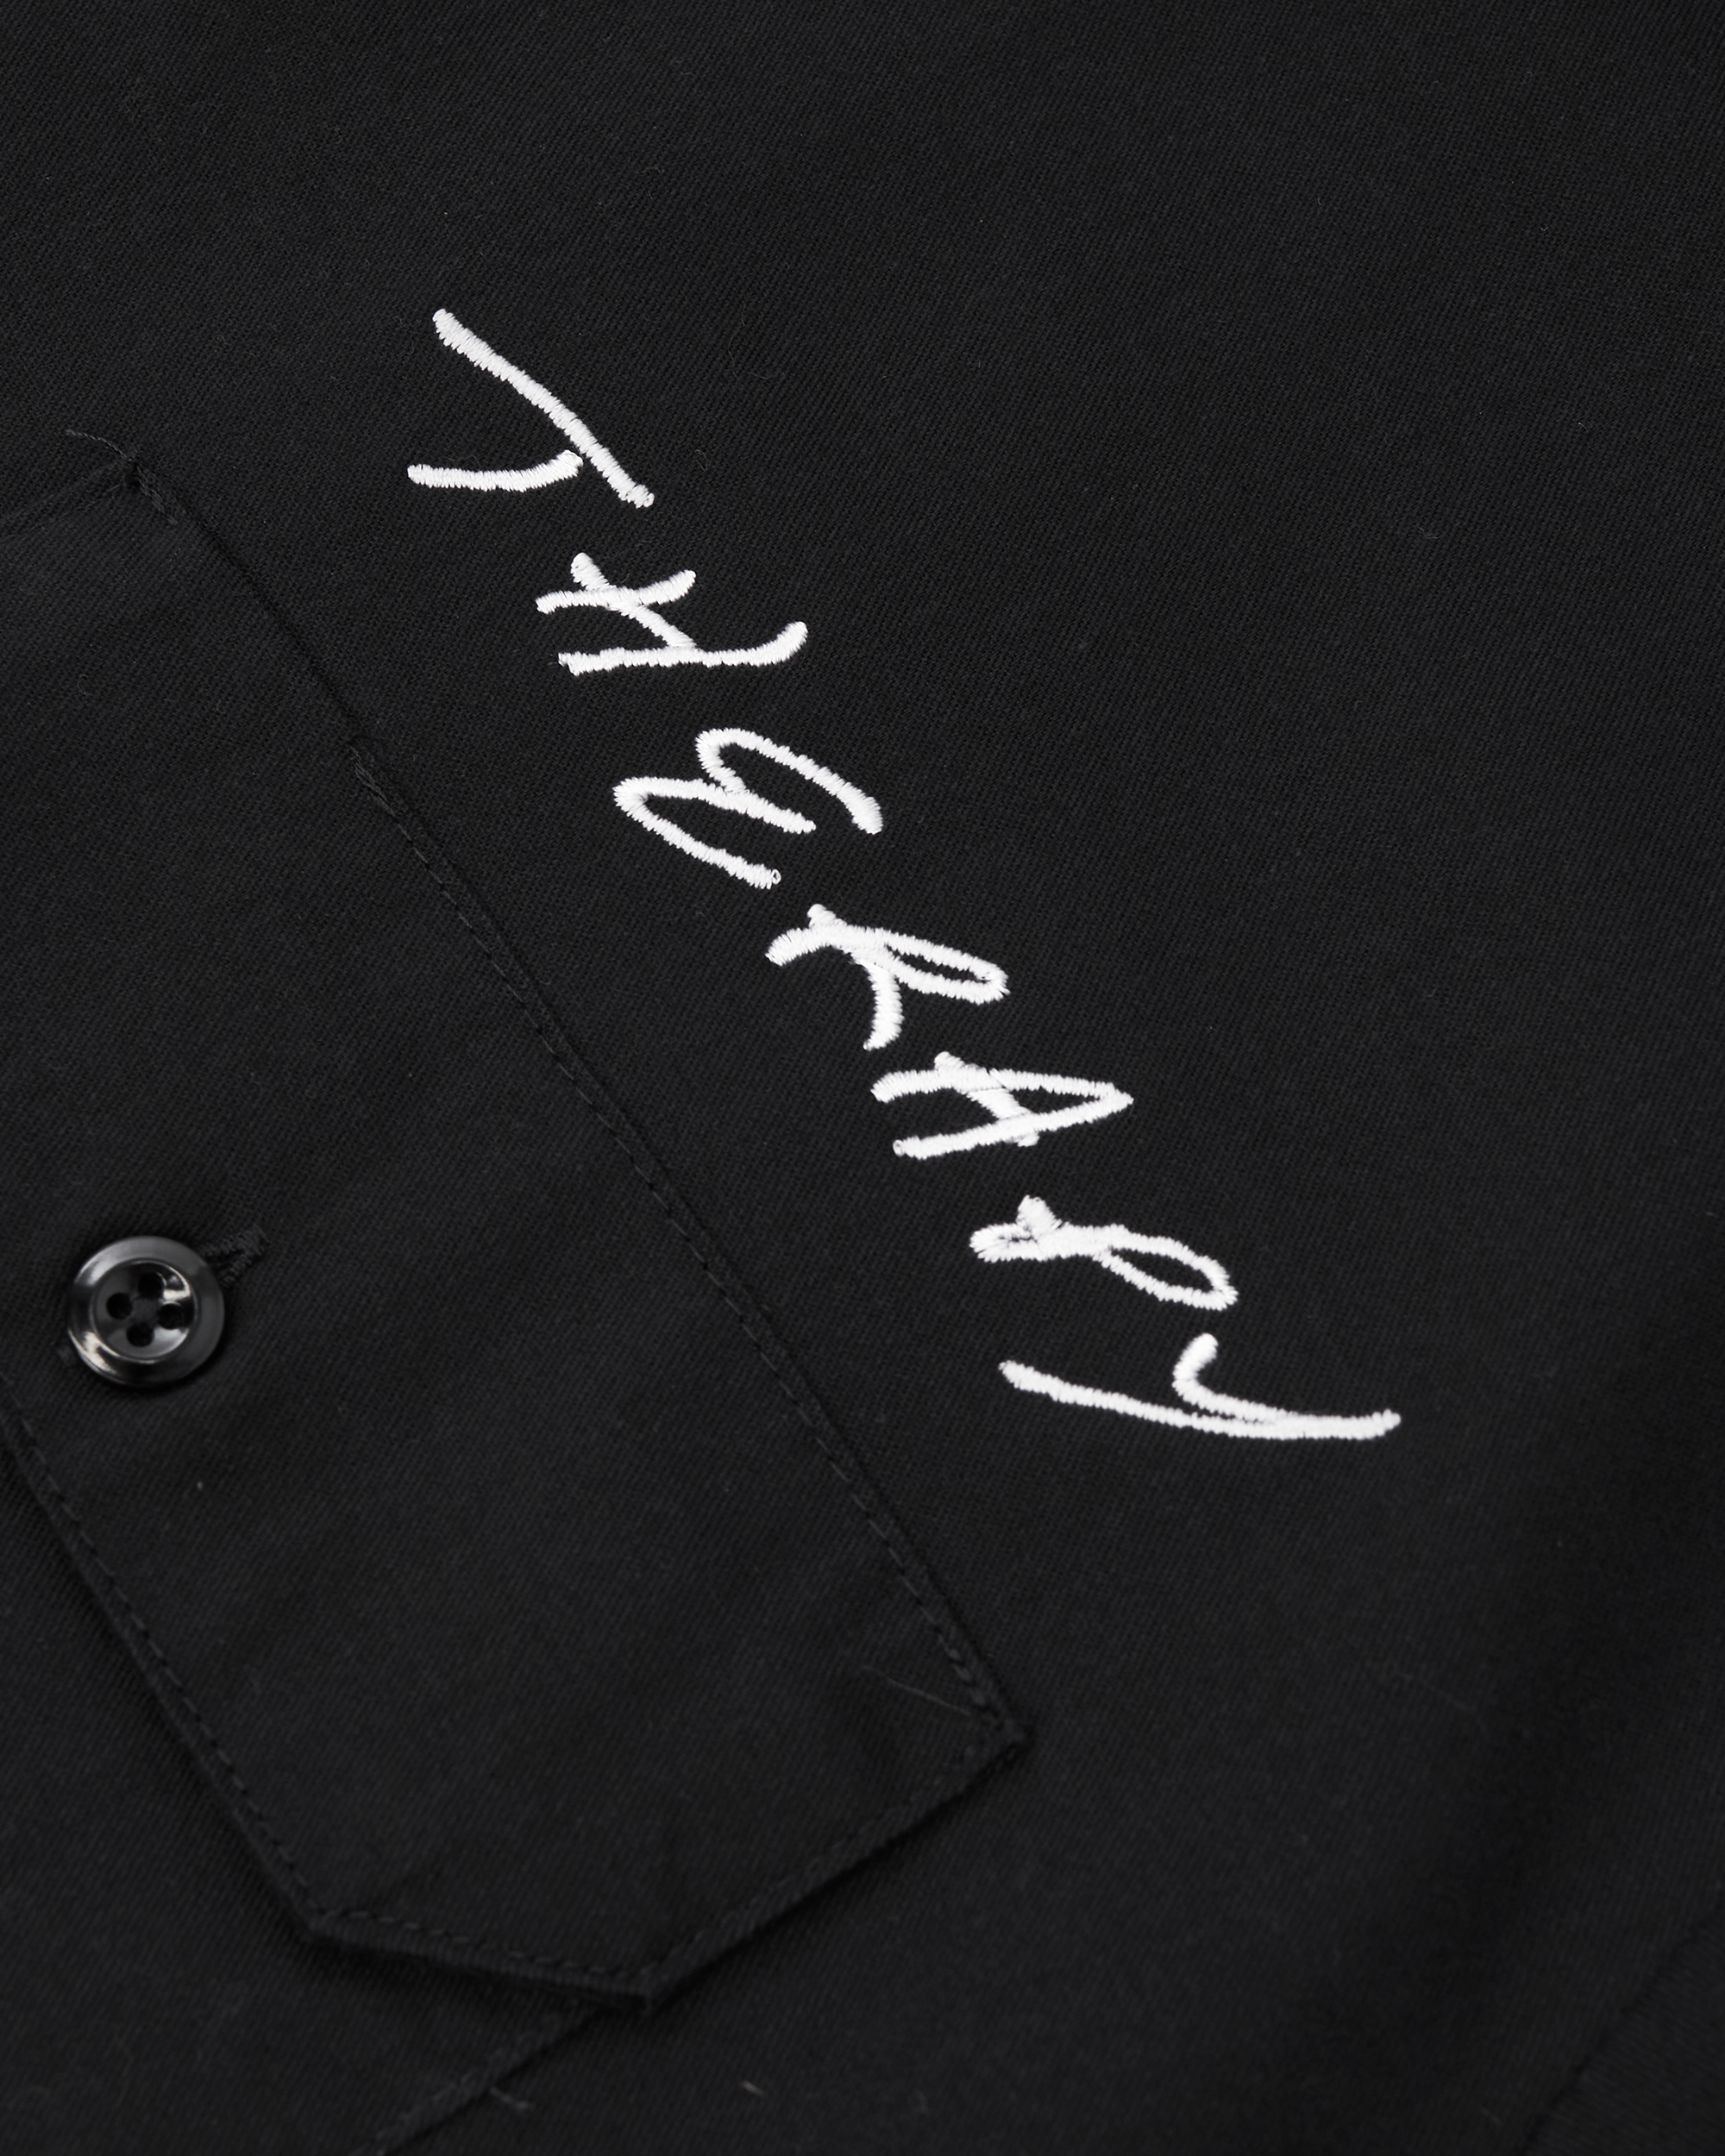 Therapy "Reloved" Dickies Work Shirt - Black